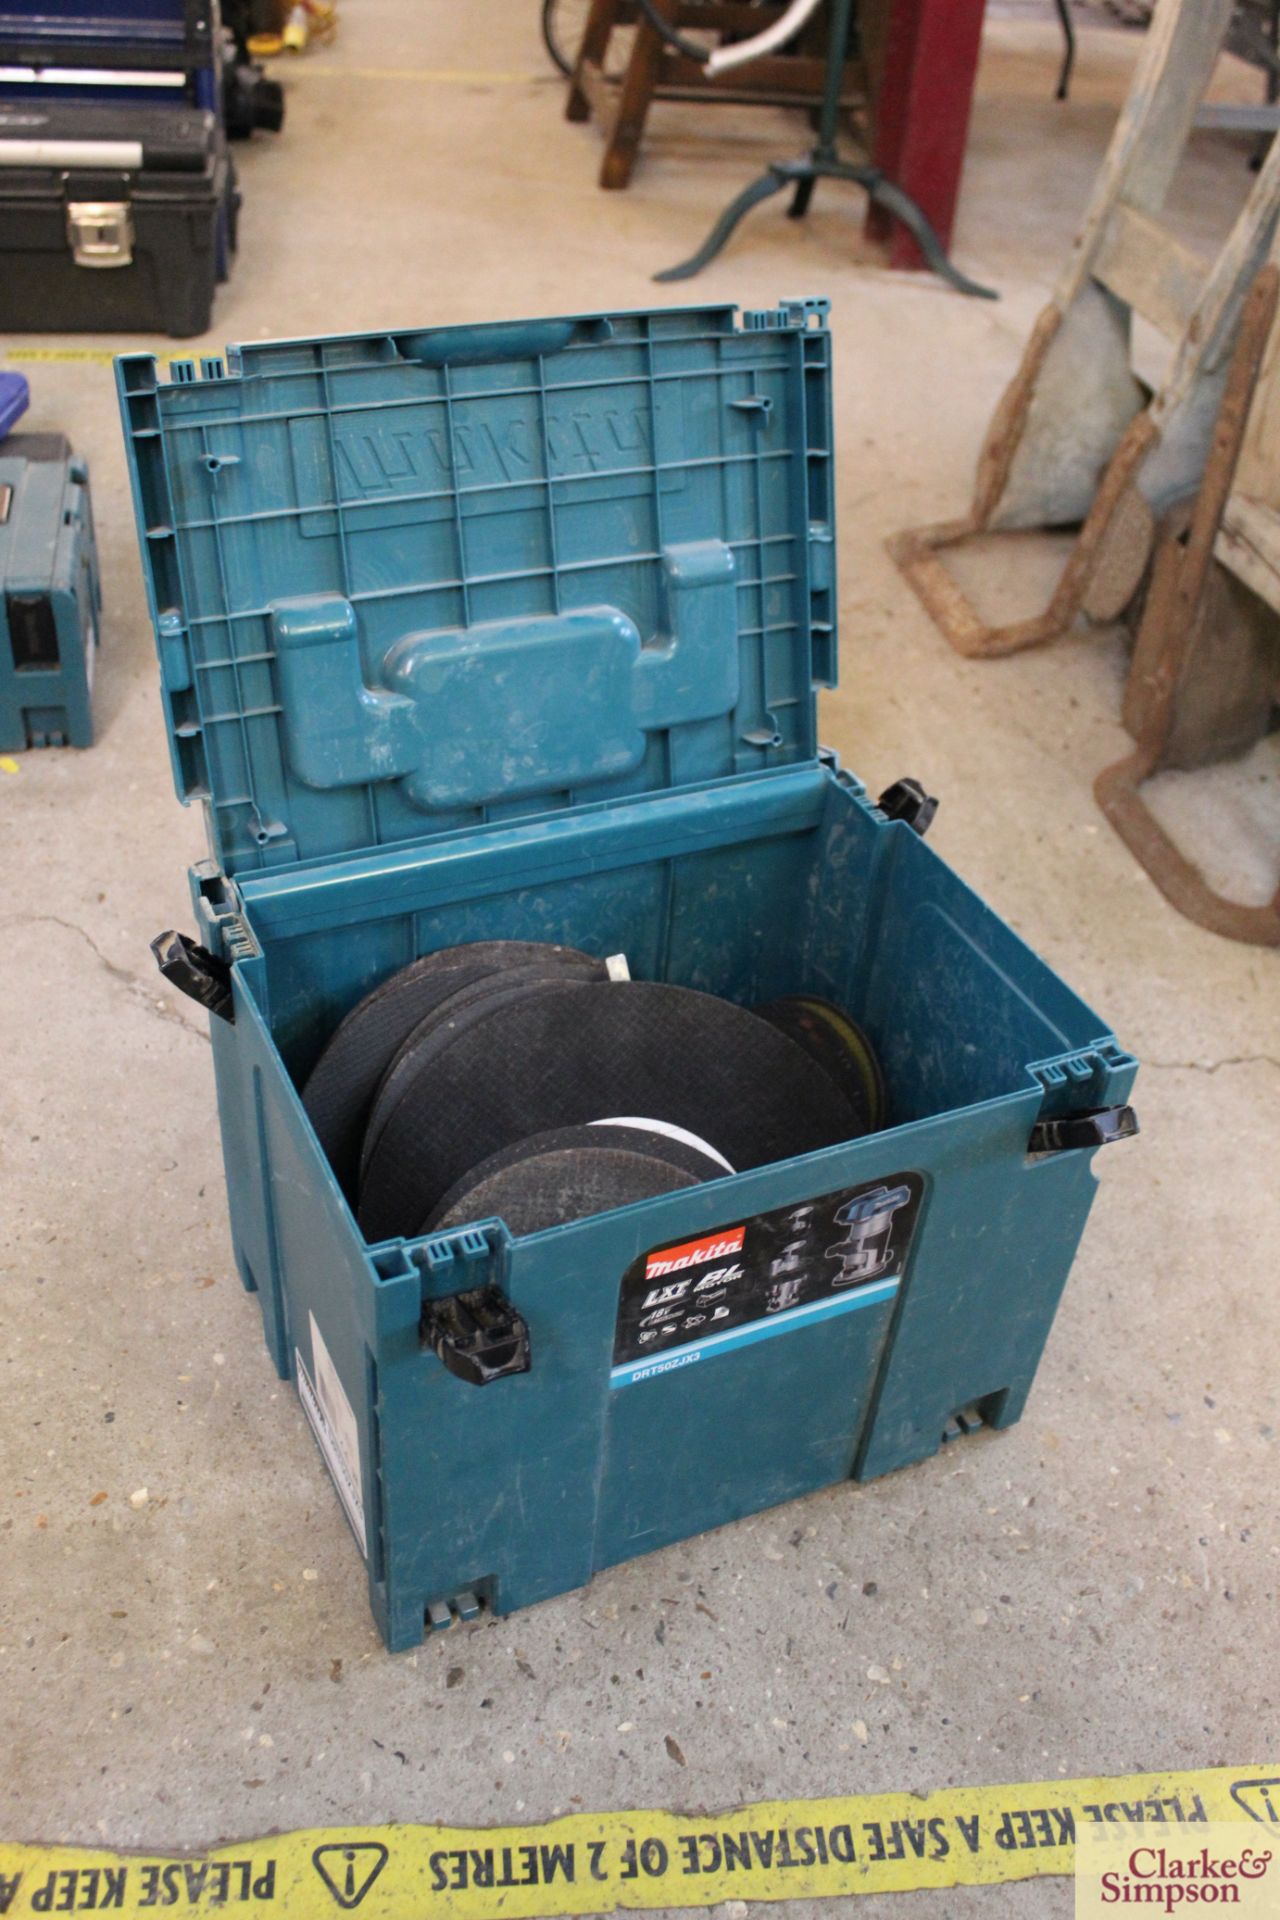 Makita toolbox containing quantity of grinding and cutting discs.